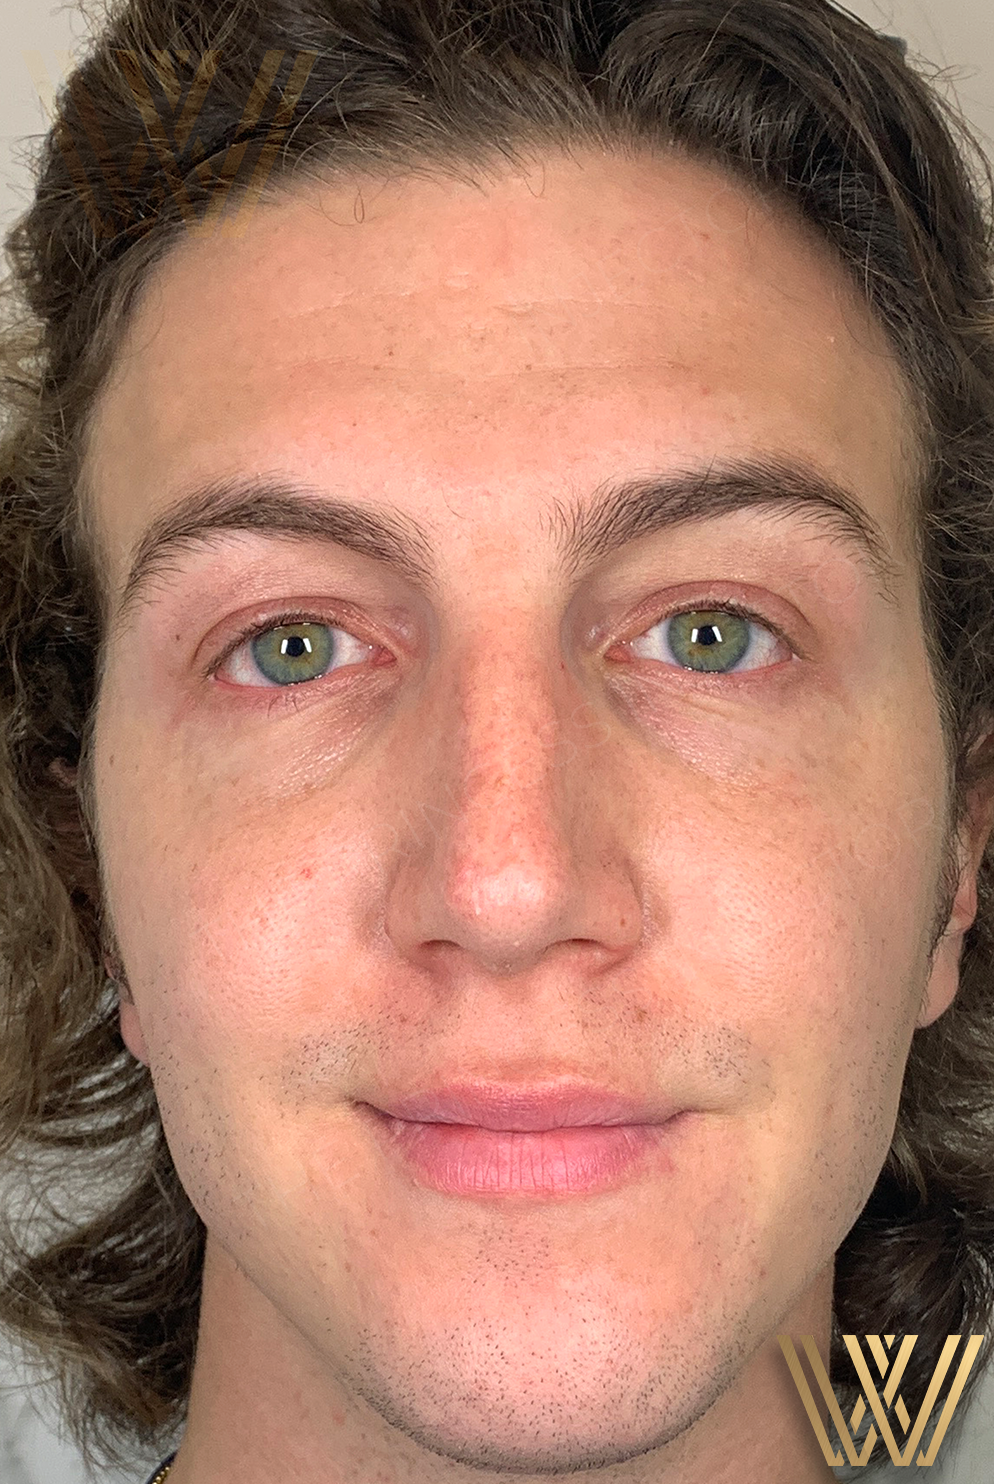 After photo showcasing the remarkable Sculptra results of a young man treated at Windermere Medical Spa & Laser Institute, top Sculptra provider in Orlando, FL